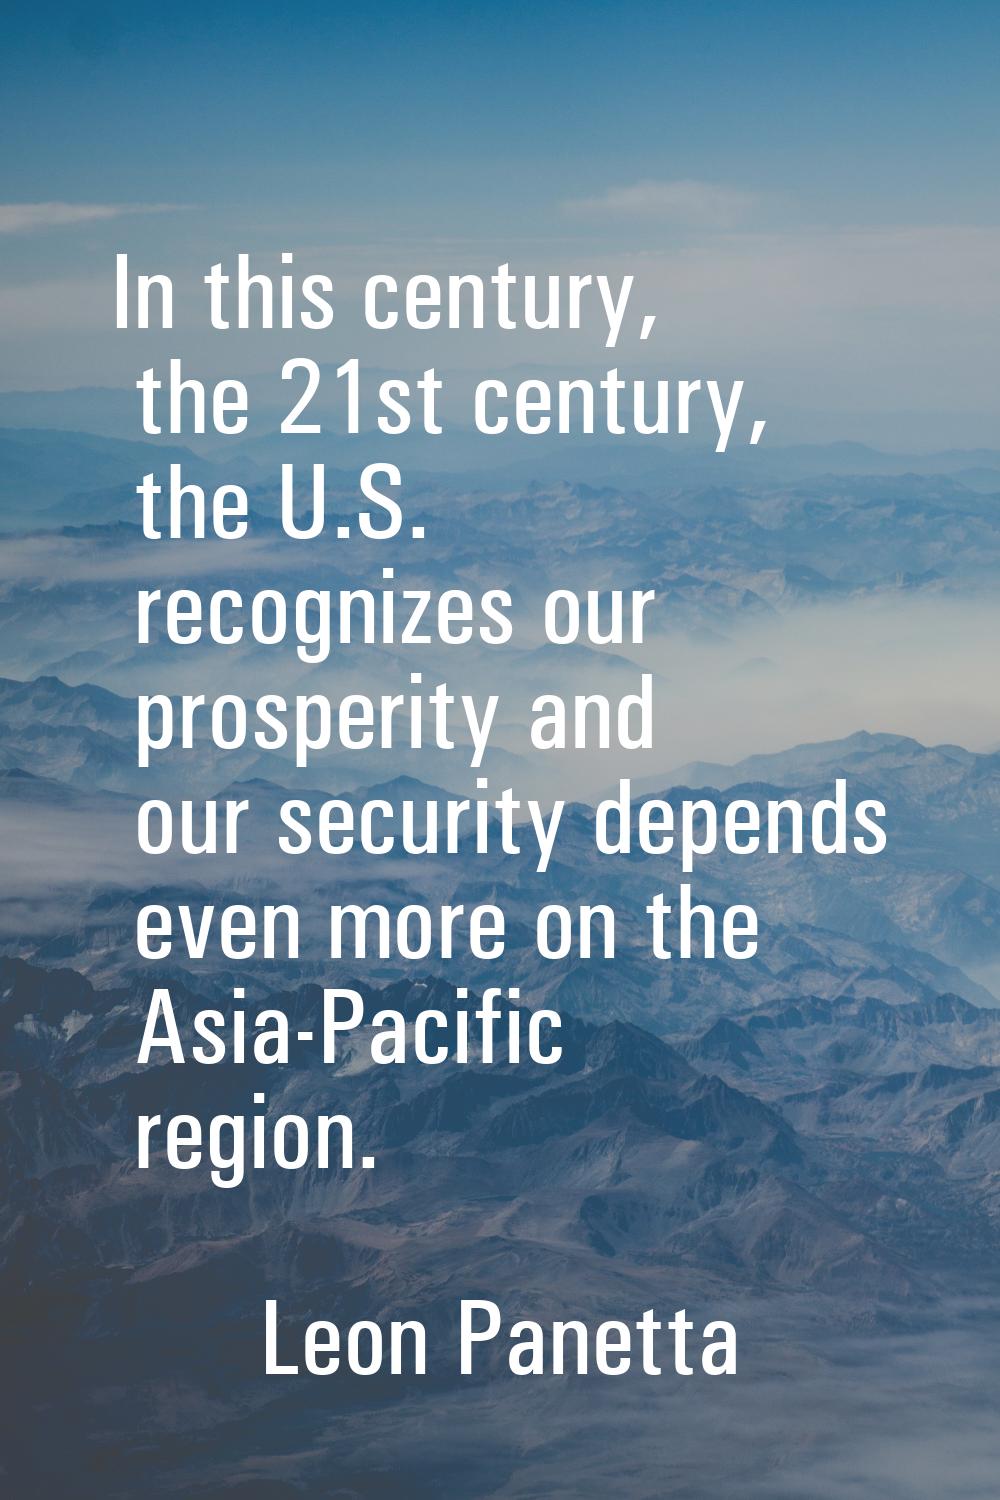 In this century, the 21st century, the U.S. recognizes our prosperity and our security depends even